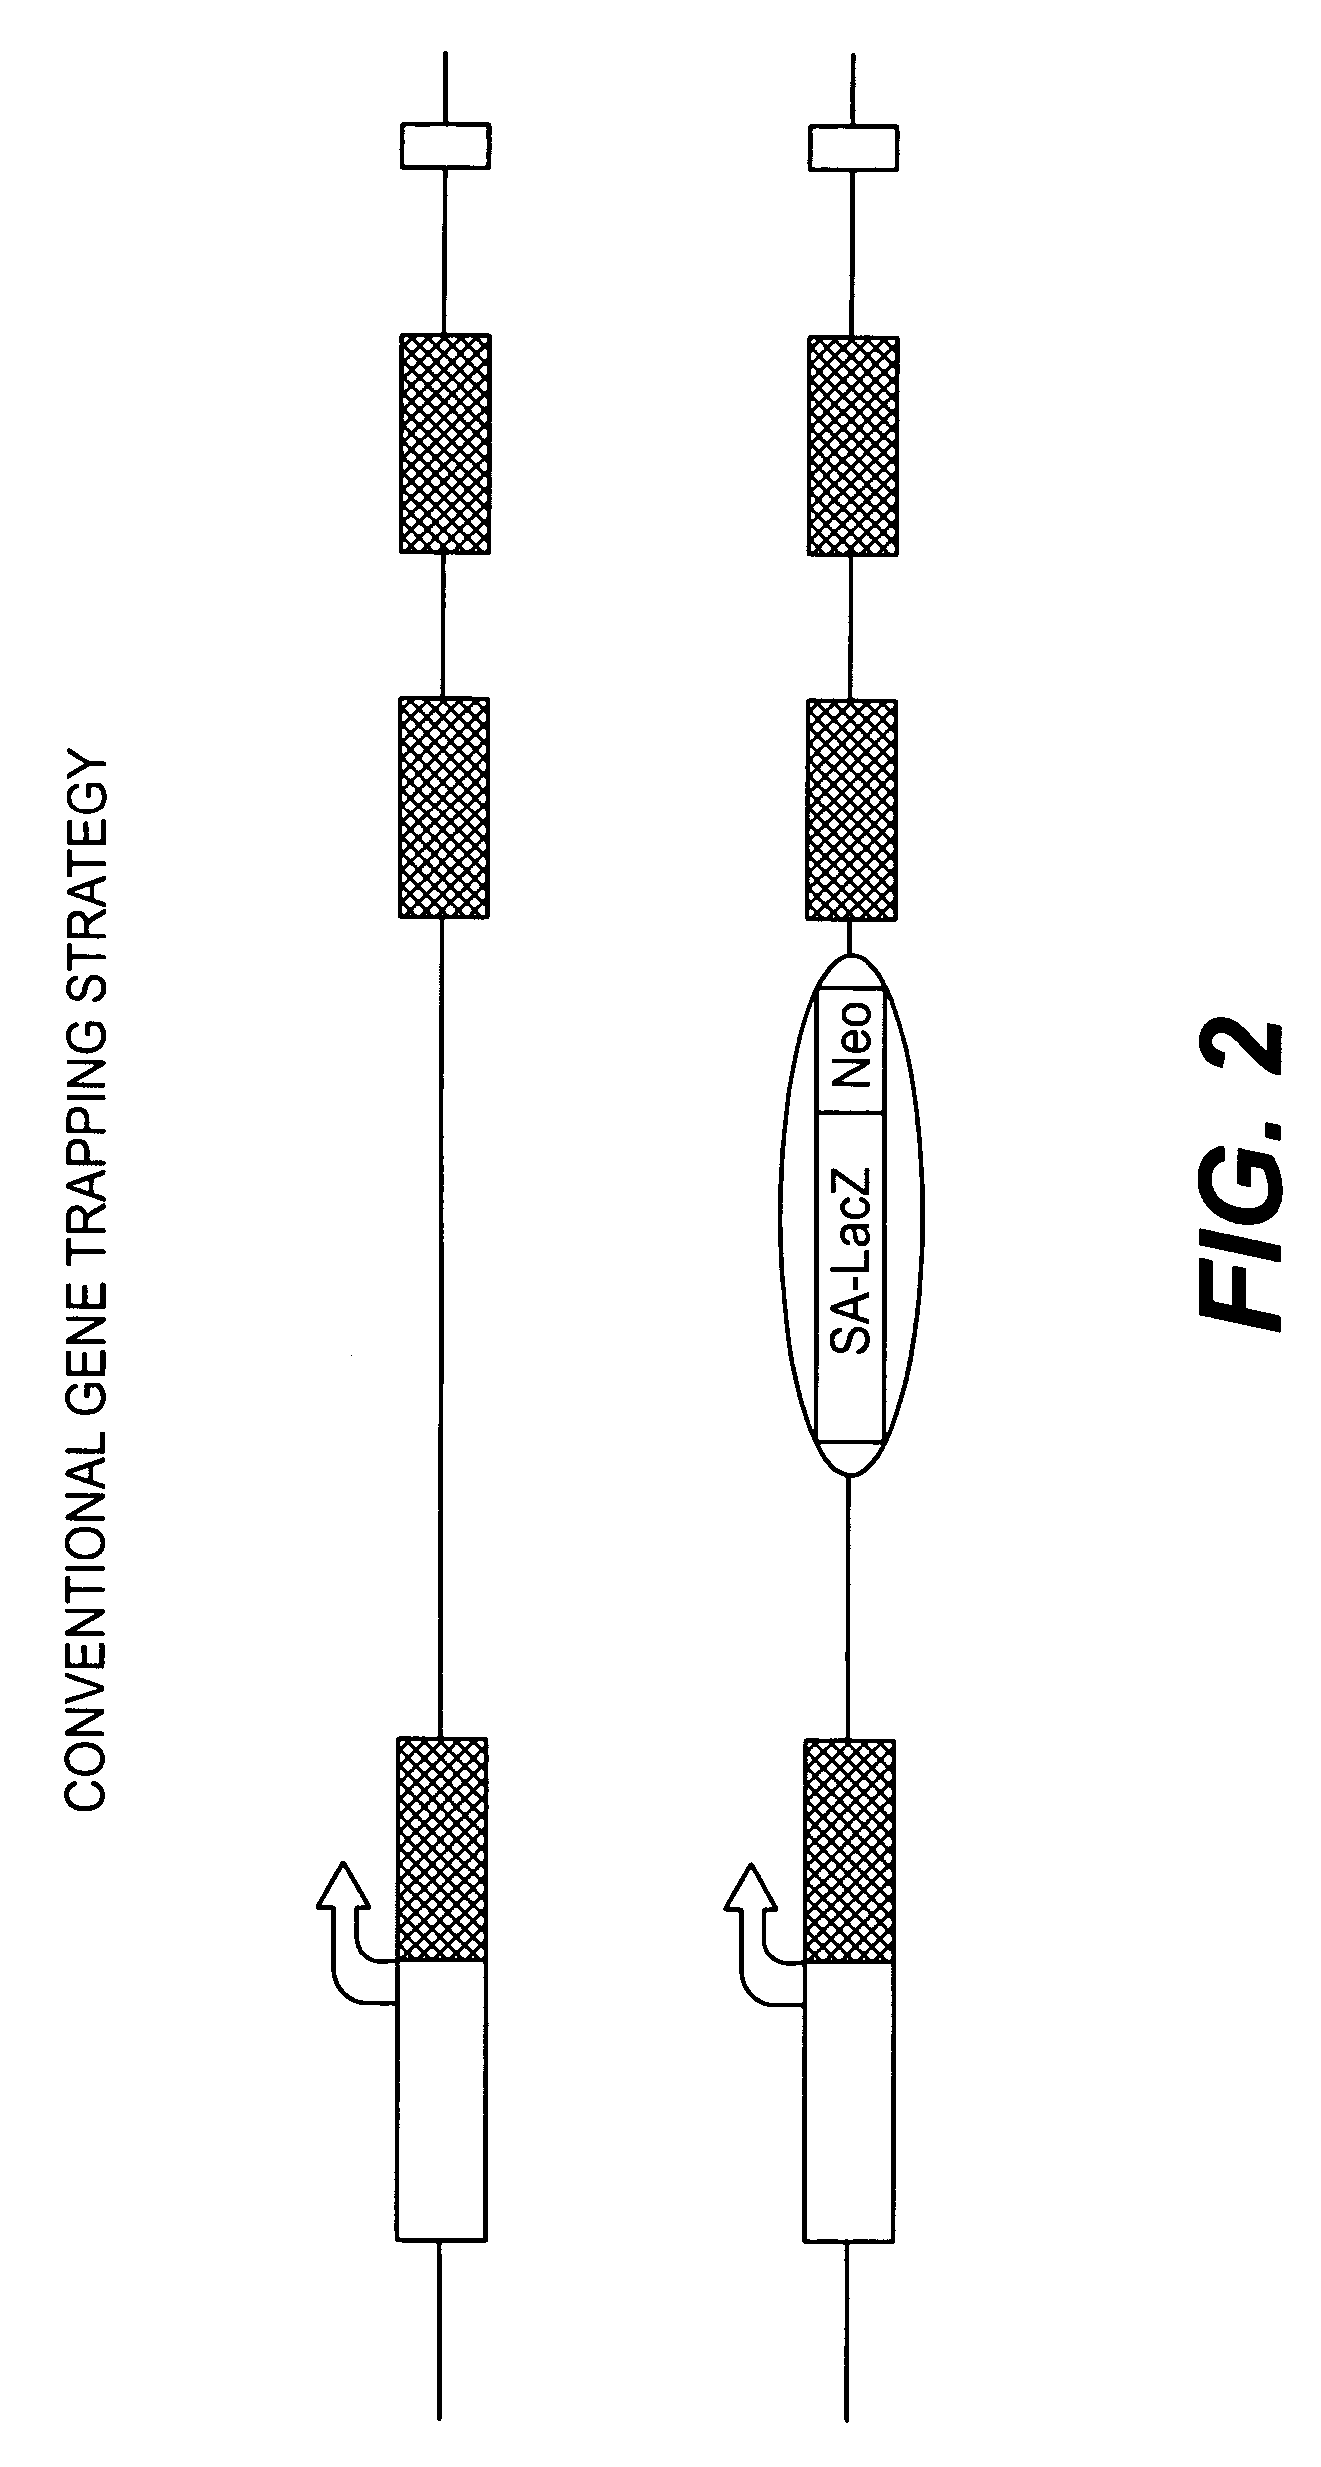 Conditional knockout method for gene trapping and gene targeting using an inducible gene silencer